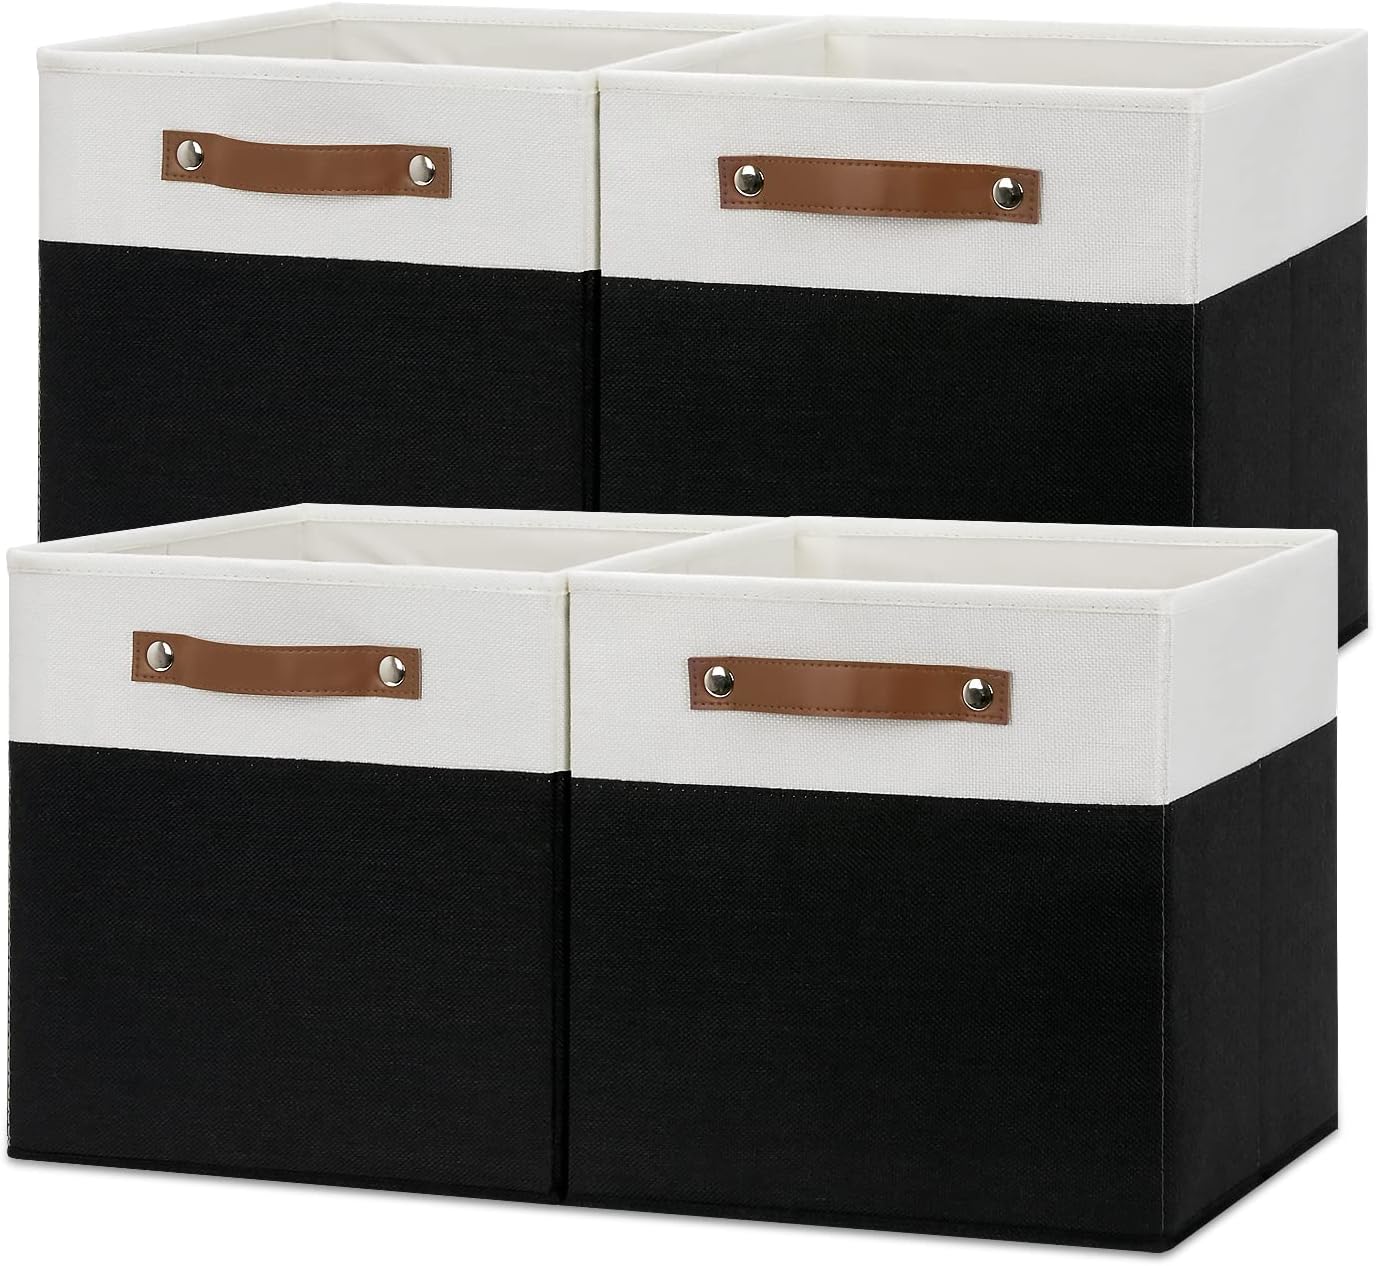 Temary Cube Storage Bins Set of 4 Storage Cubes Organizers Bin with Handles, Foldable Storage Baskets for Shelves, Decorative Storage Boxes for Home, Office (White&Black)